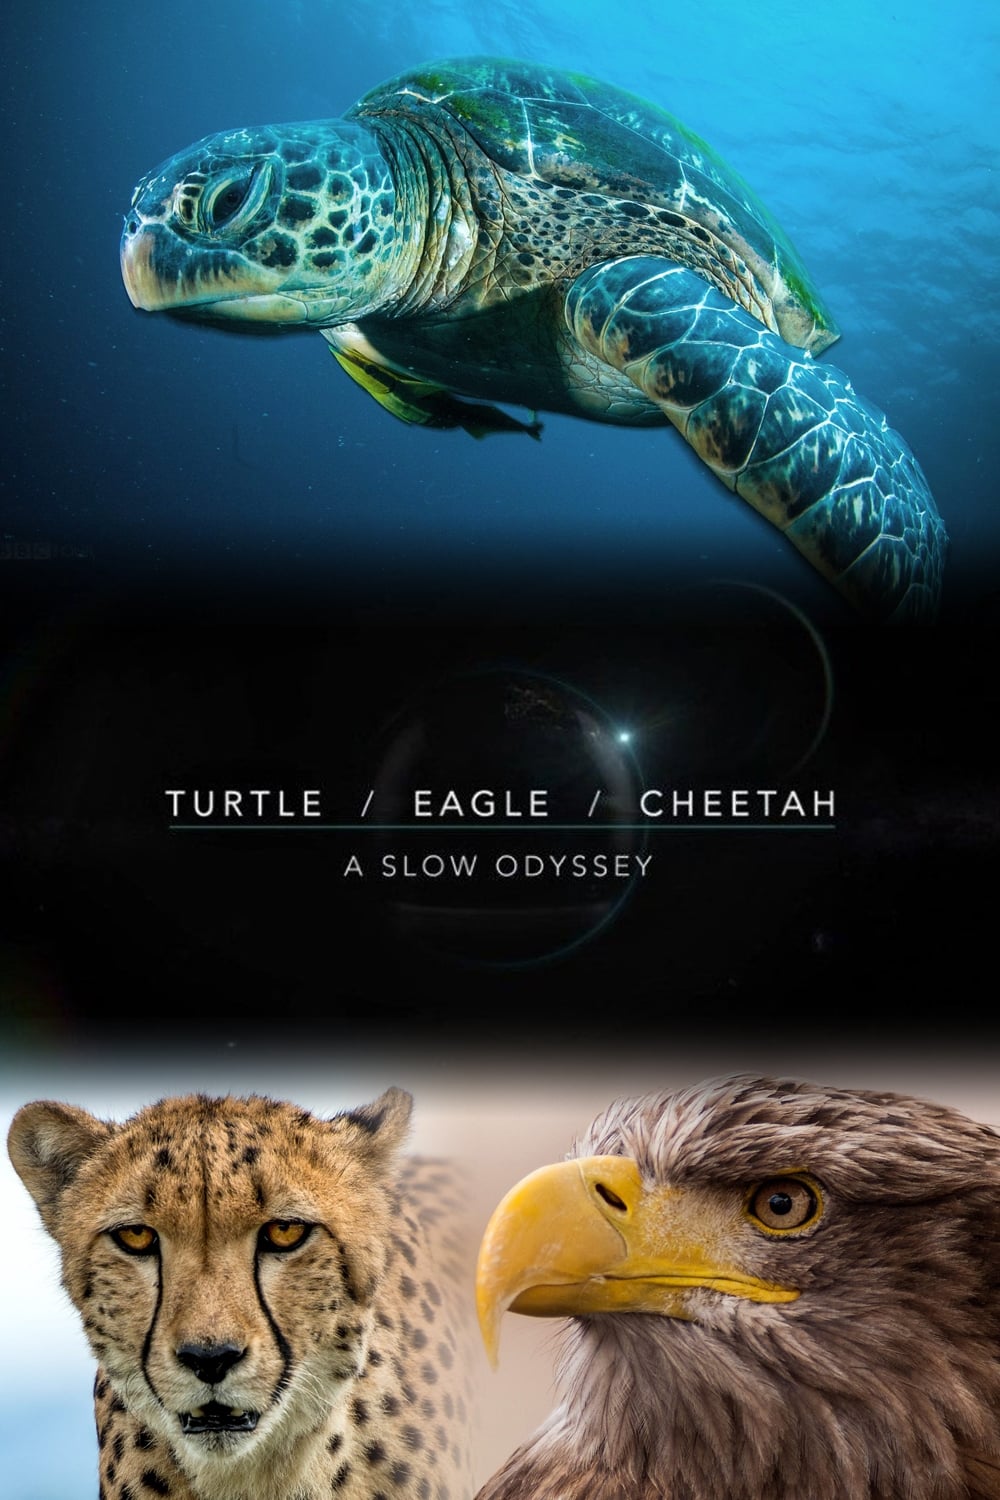 Turtle, Eagle, Cheetah: A Slow Odyssey TV Shows About Natural History